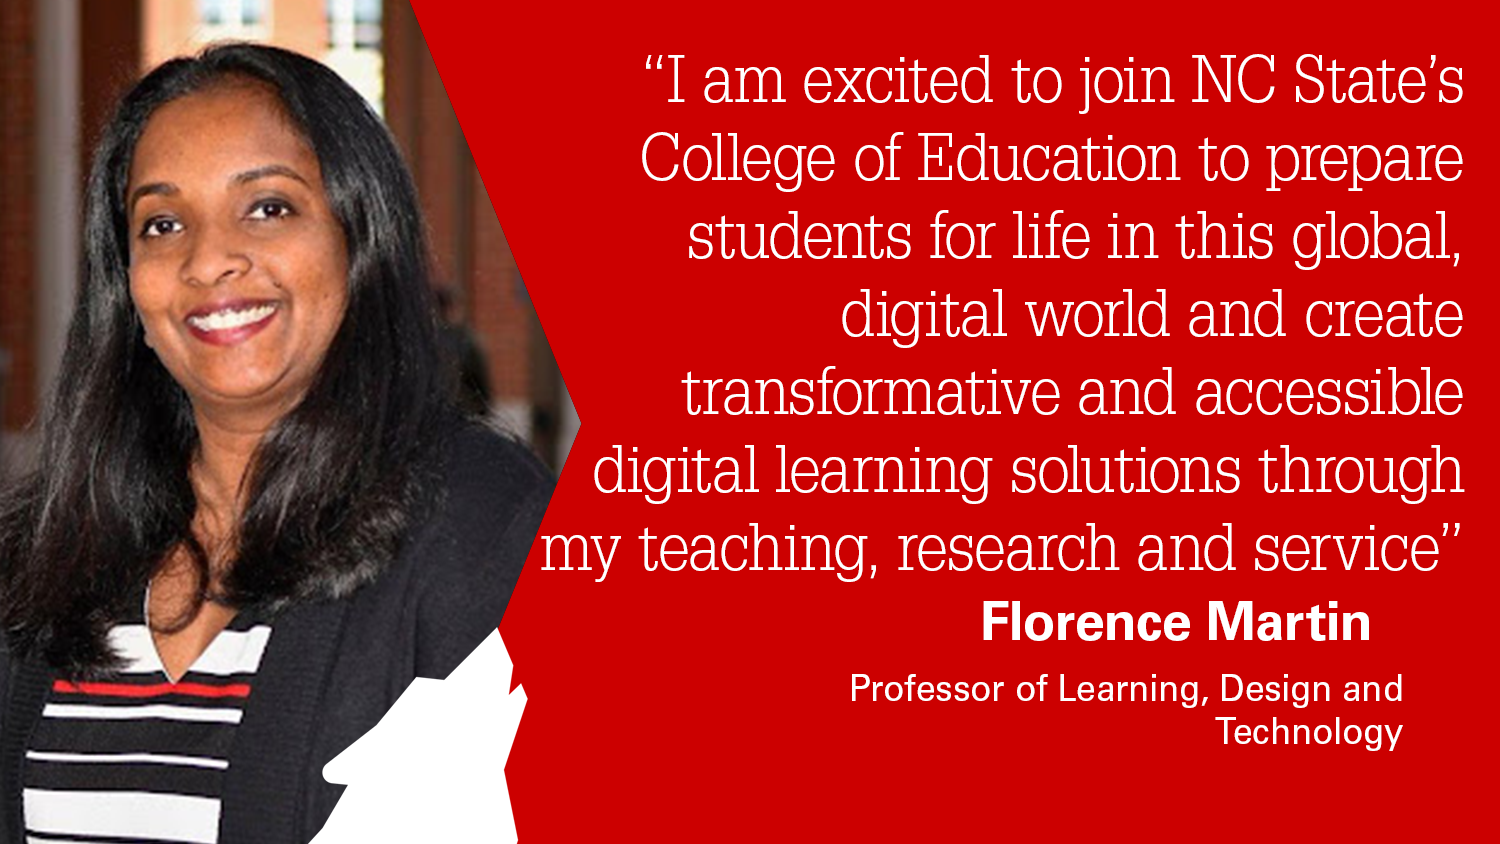 NC State College of Education Professor of Learning, Design and Technology Florence Martin